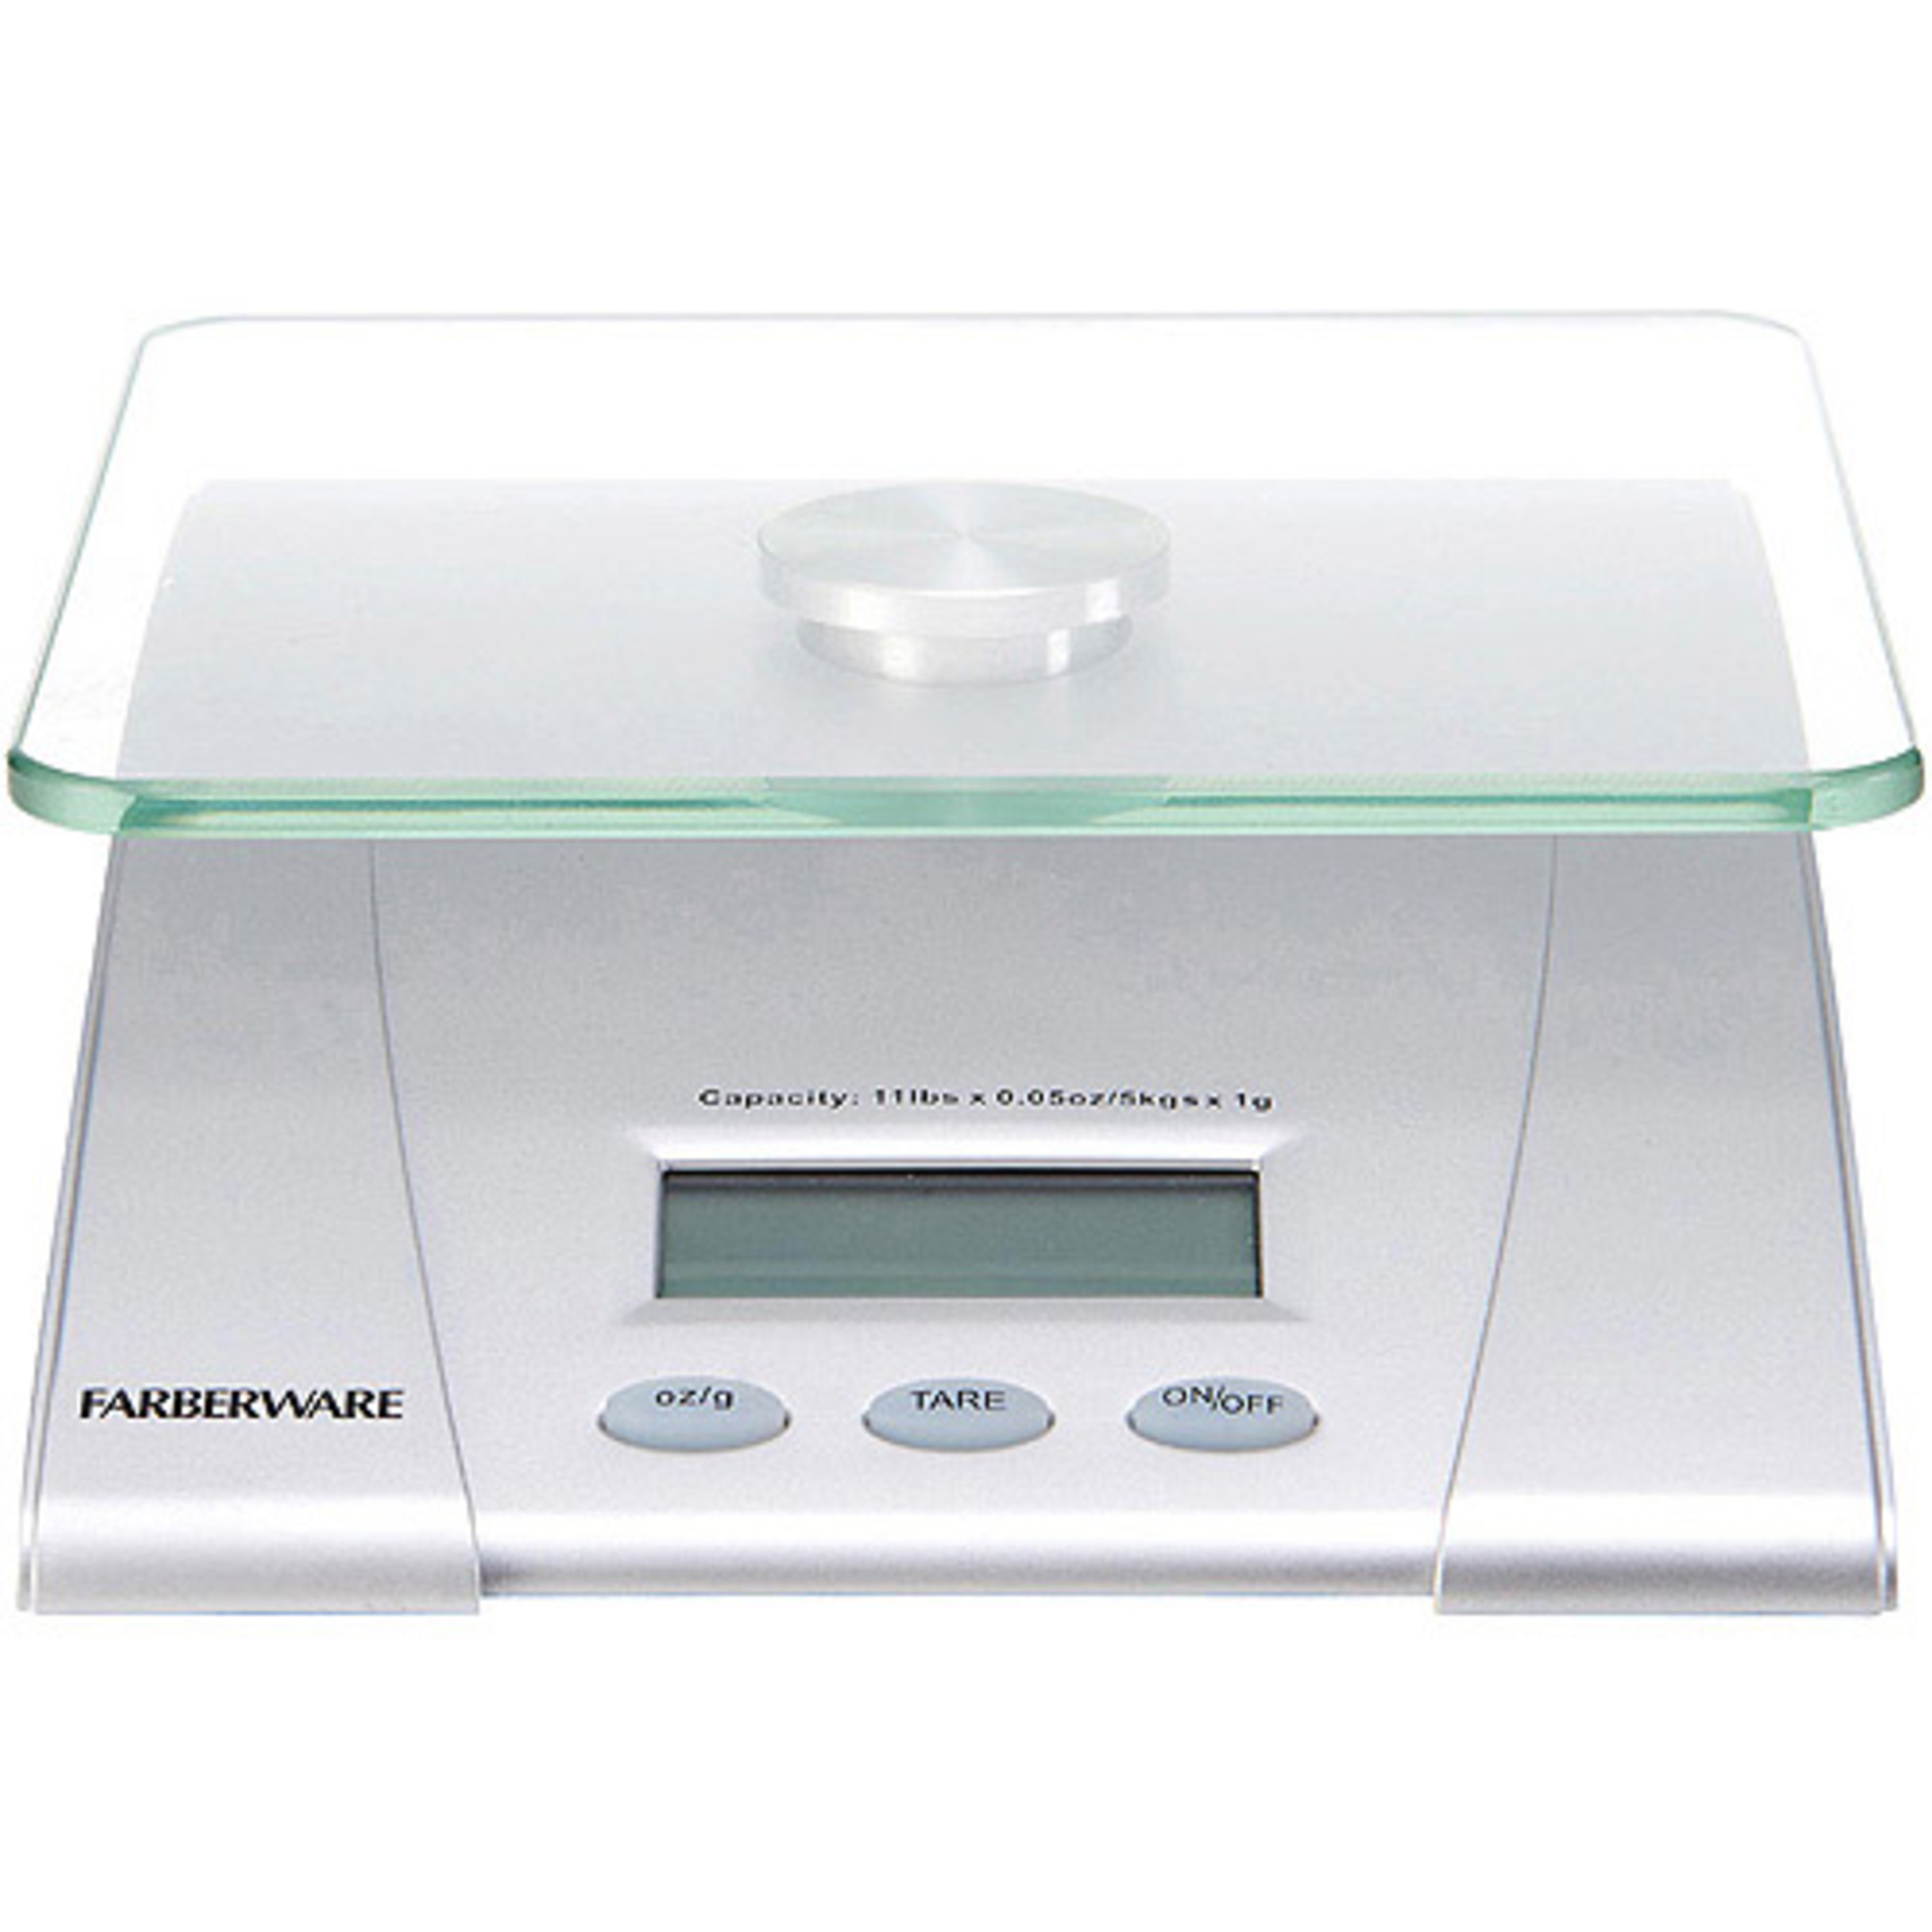 Farberware Professional Electronic Glass Top Kitchen Scale - image 3 of 9